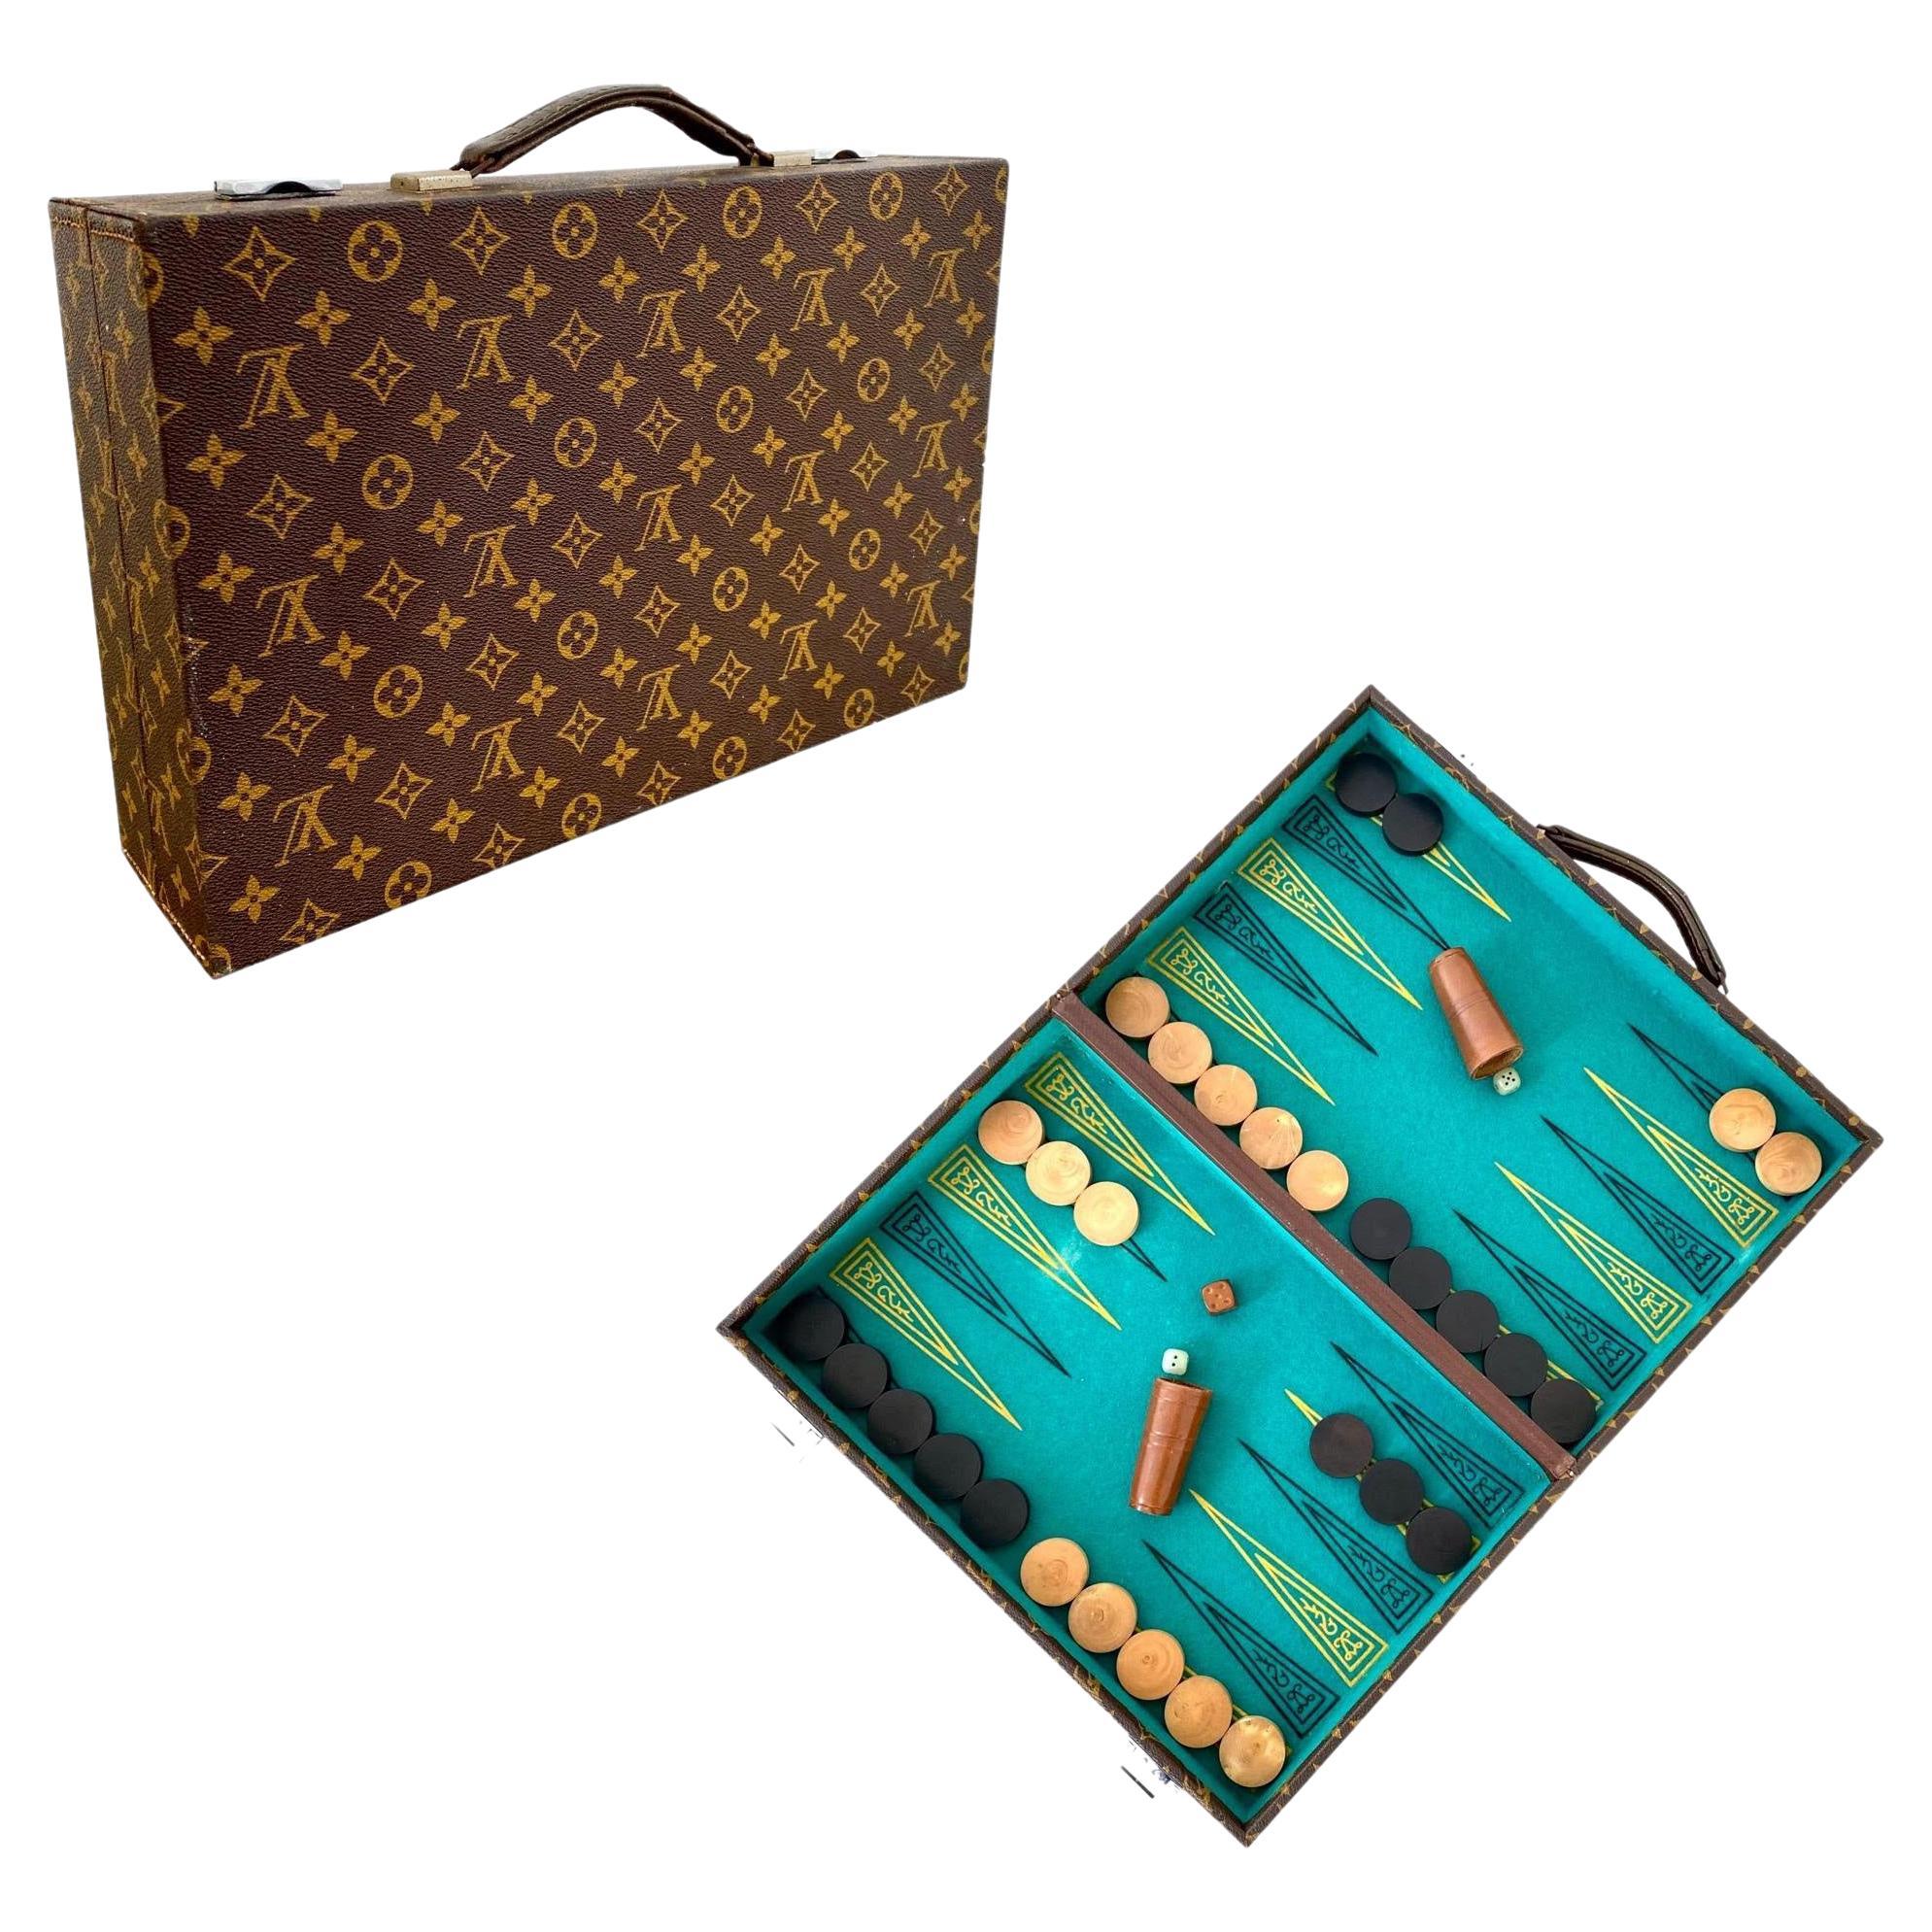 Philux Spaces collaborates with Louis Vuitton